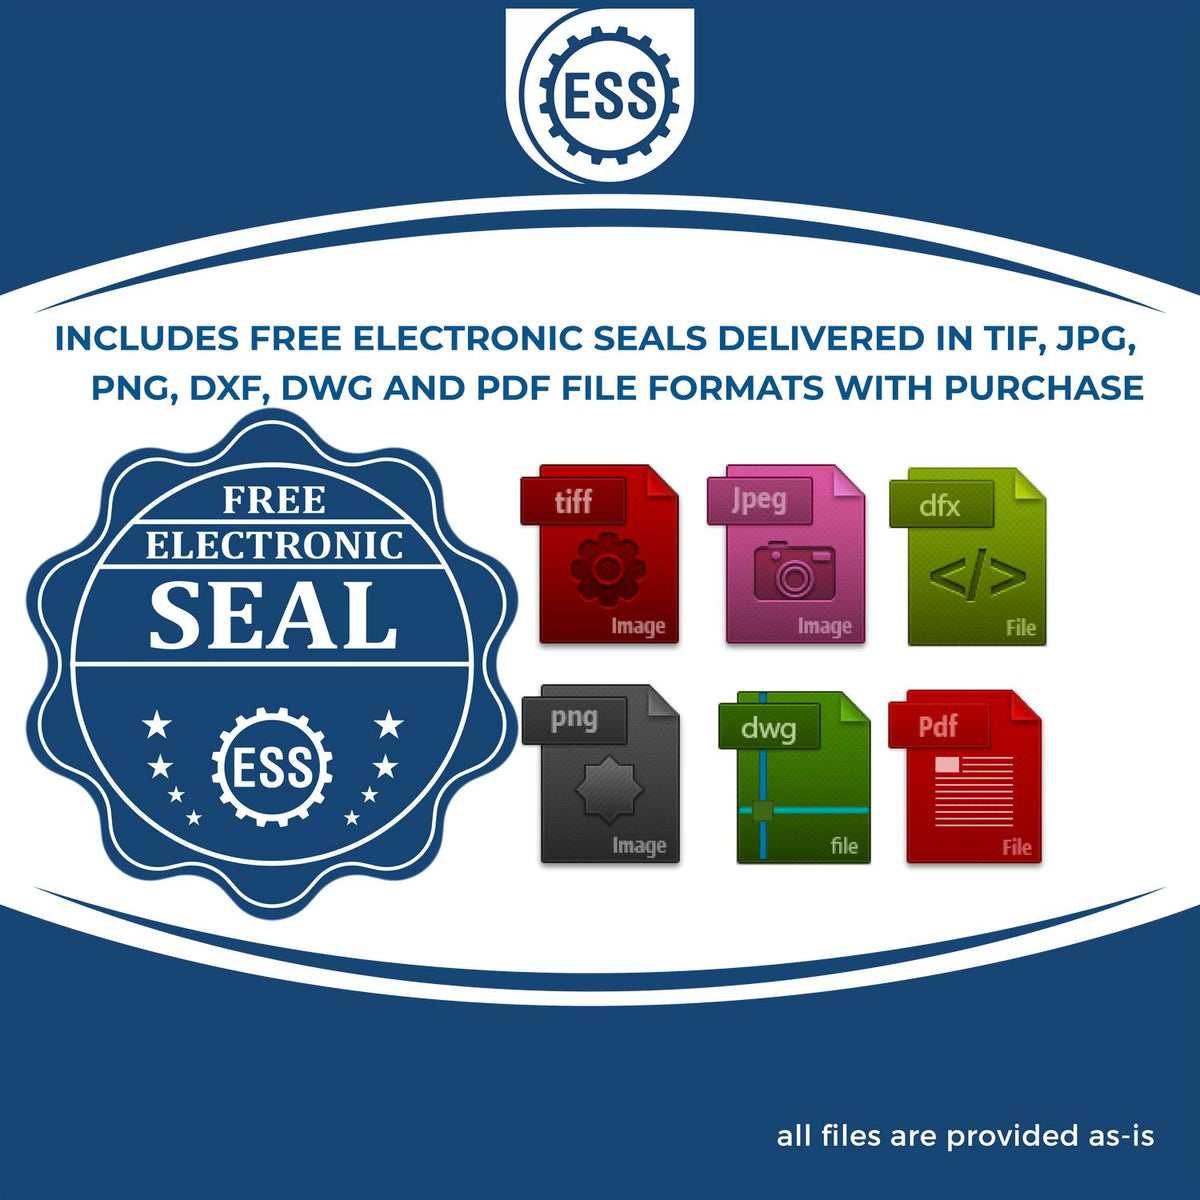 An infographic for the free electronic seal for the Gift Delaware Engineer Seal illustrating the different file type icons such as DXF, DWG, TIF, JPG and PNG.